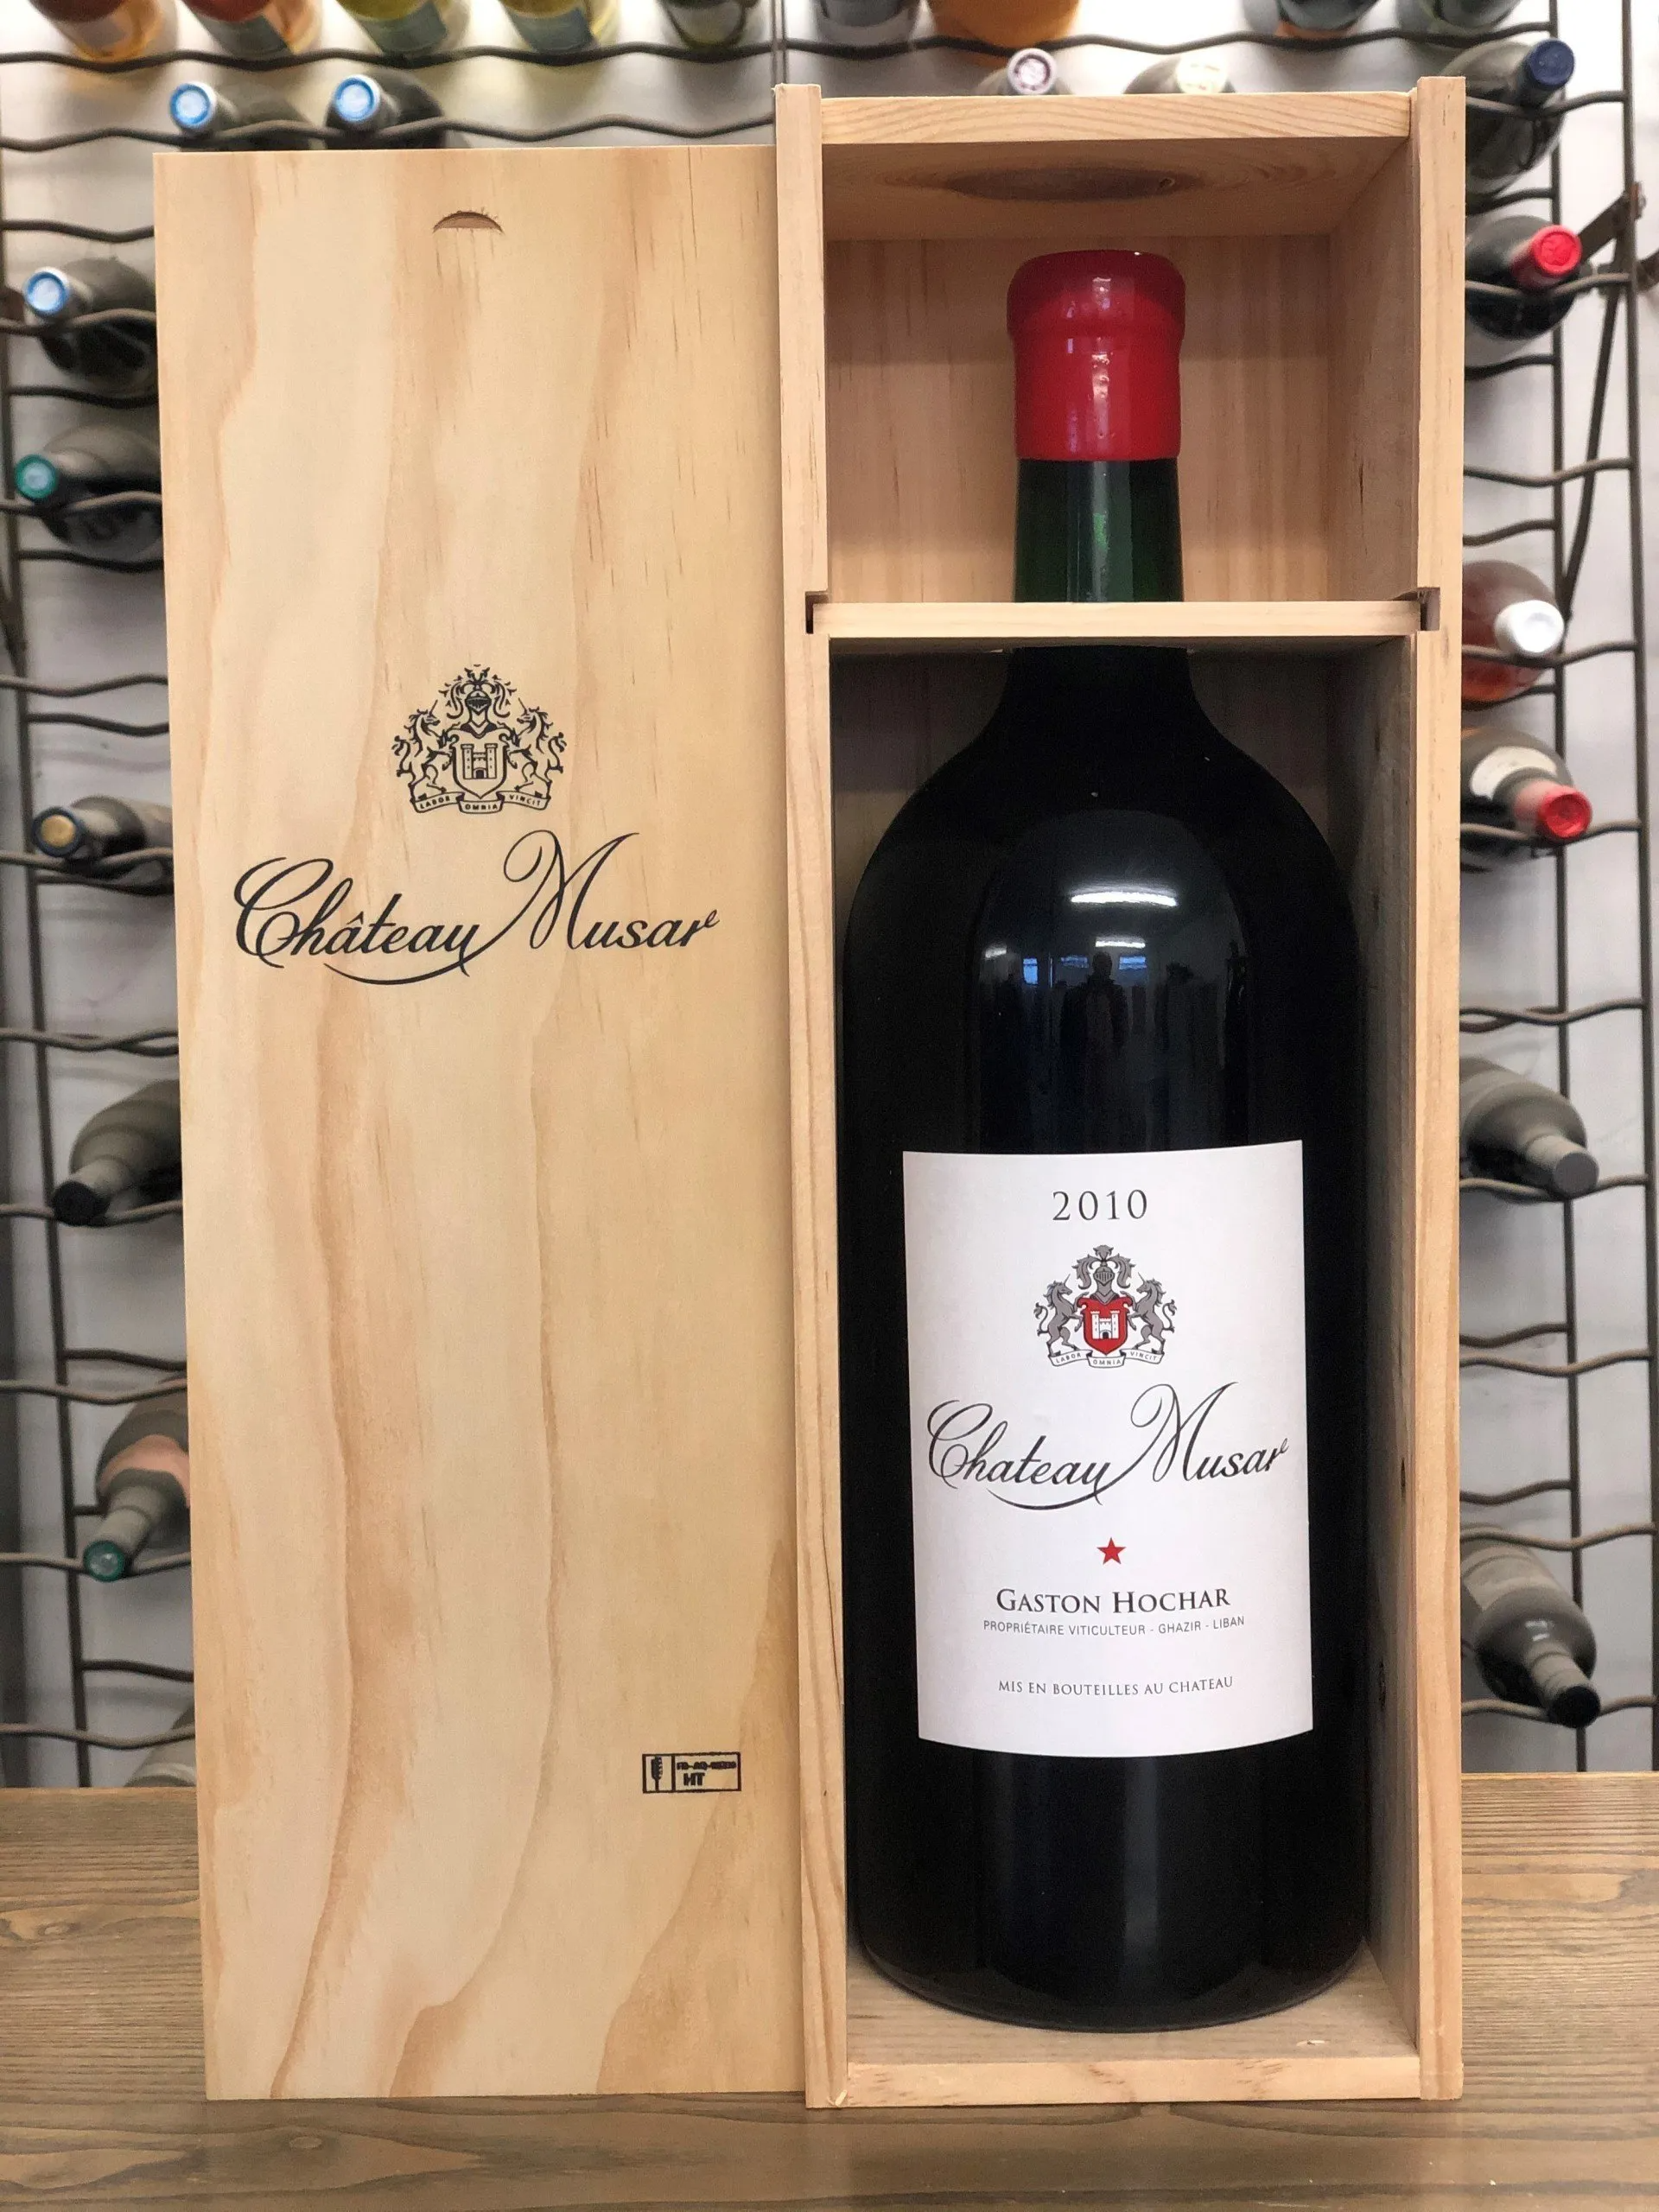 Imperial Chateau Musar 2010 in Wooden Gift Box